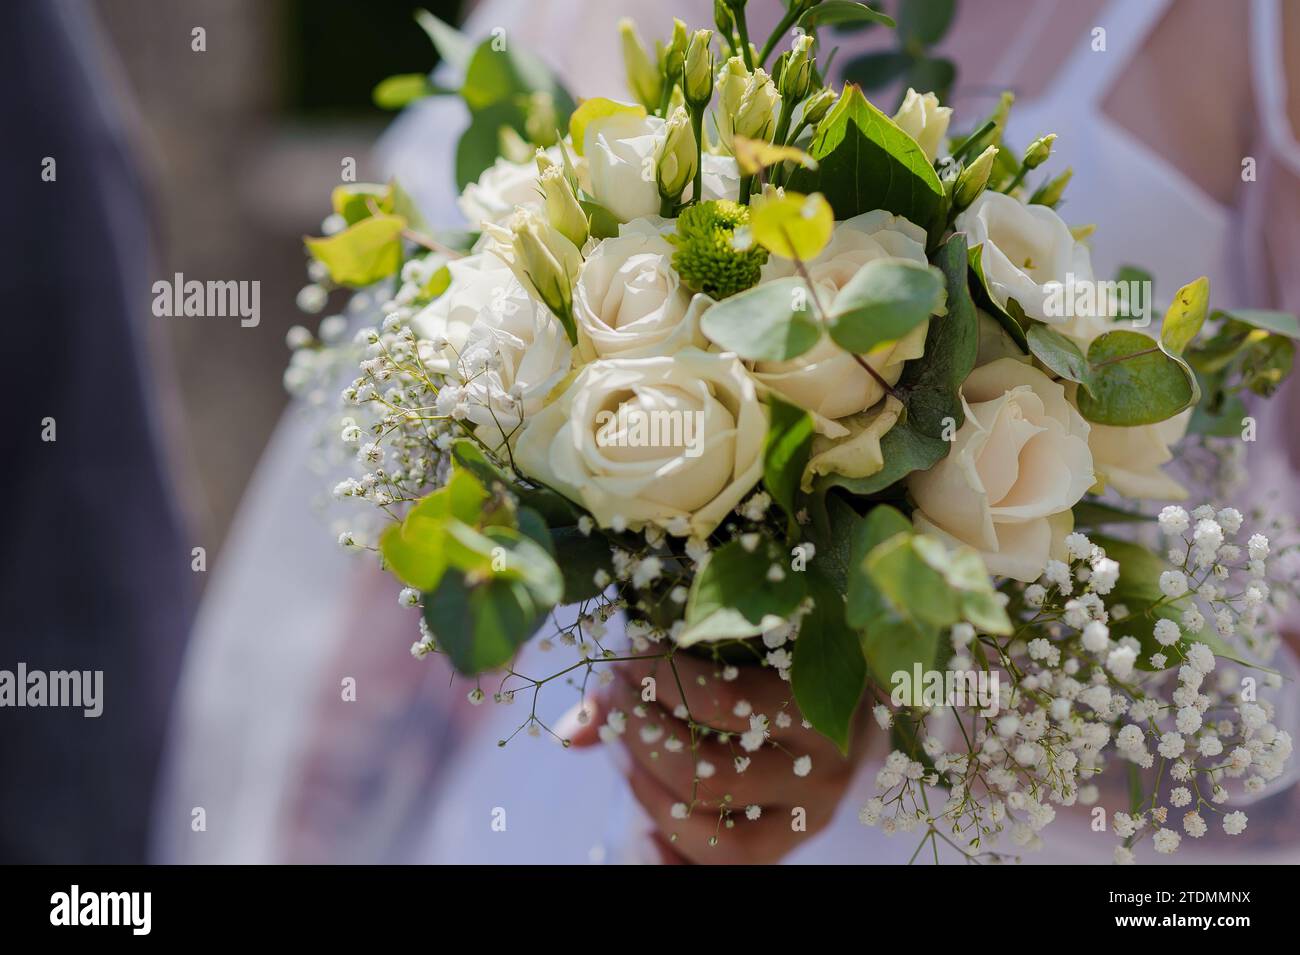 A beautiful wedding bouquet in the hands of the bride. Bouquet with white roses in the hands of the bride Stock Photo